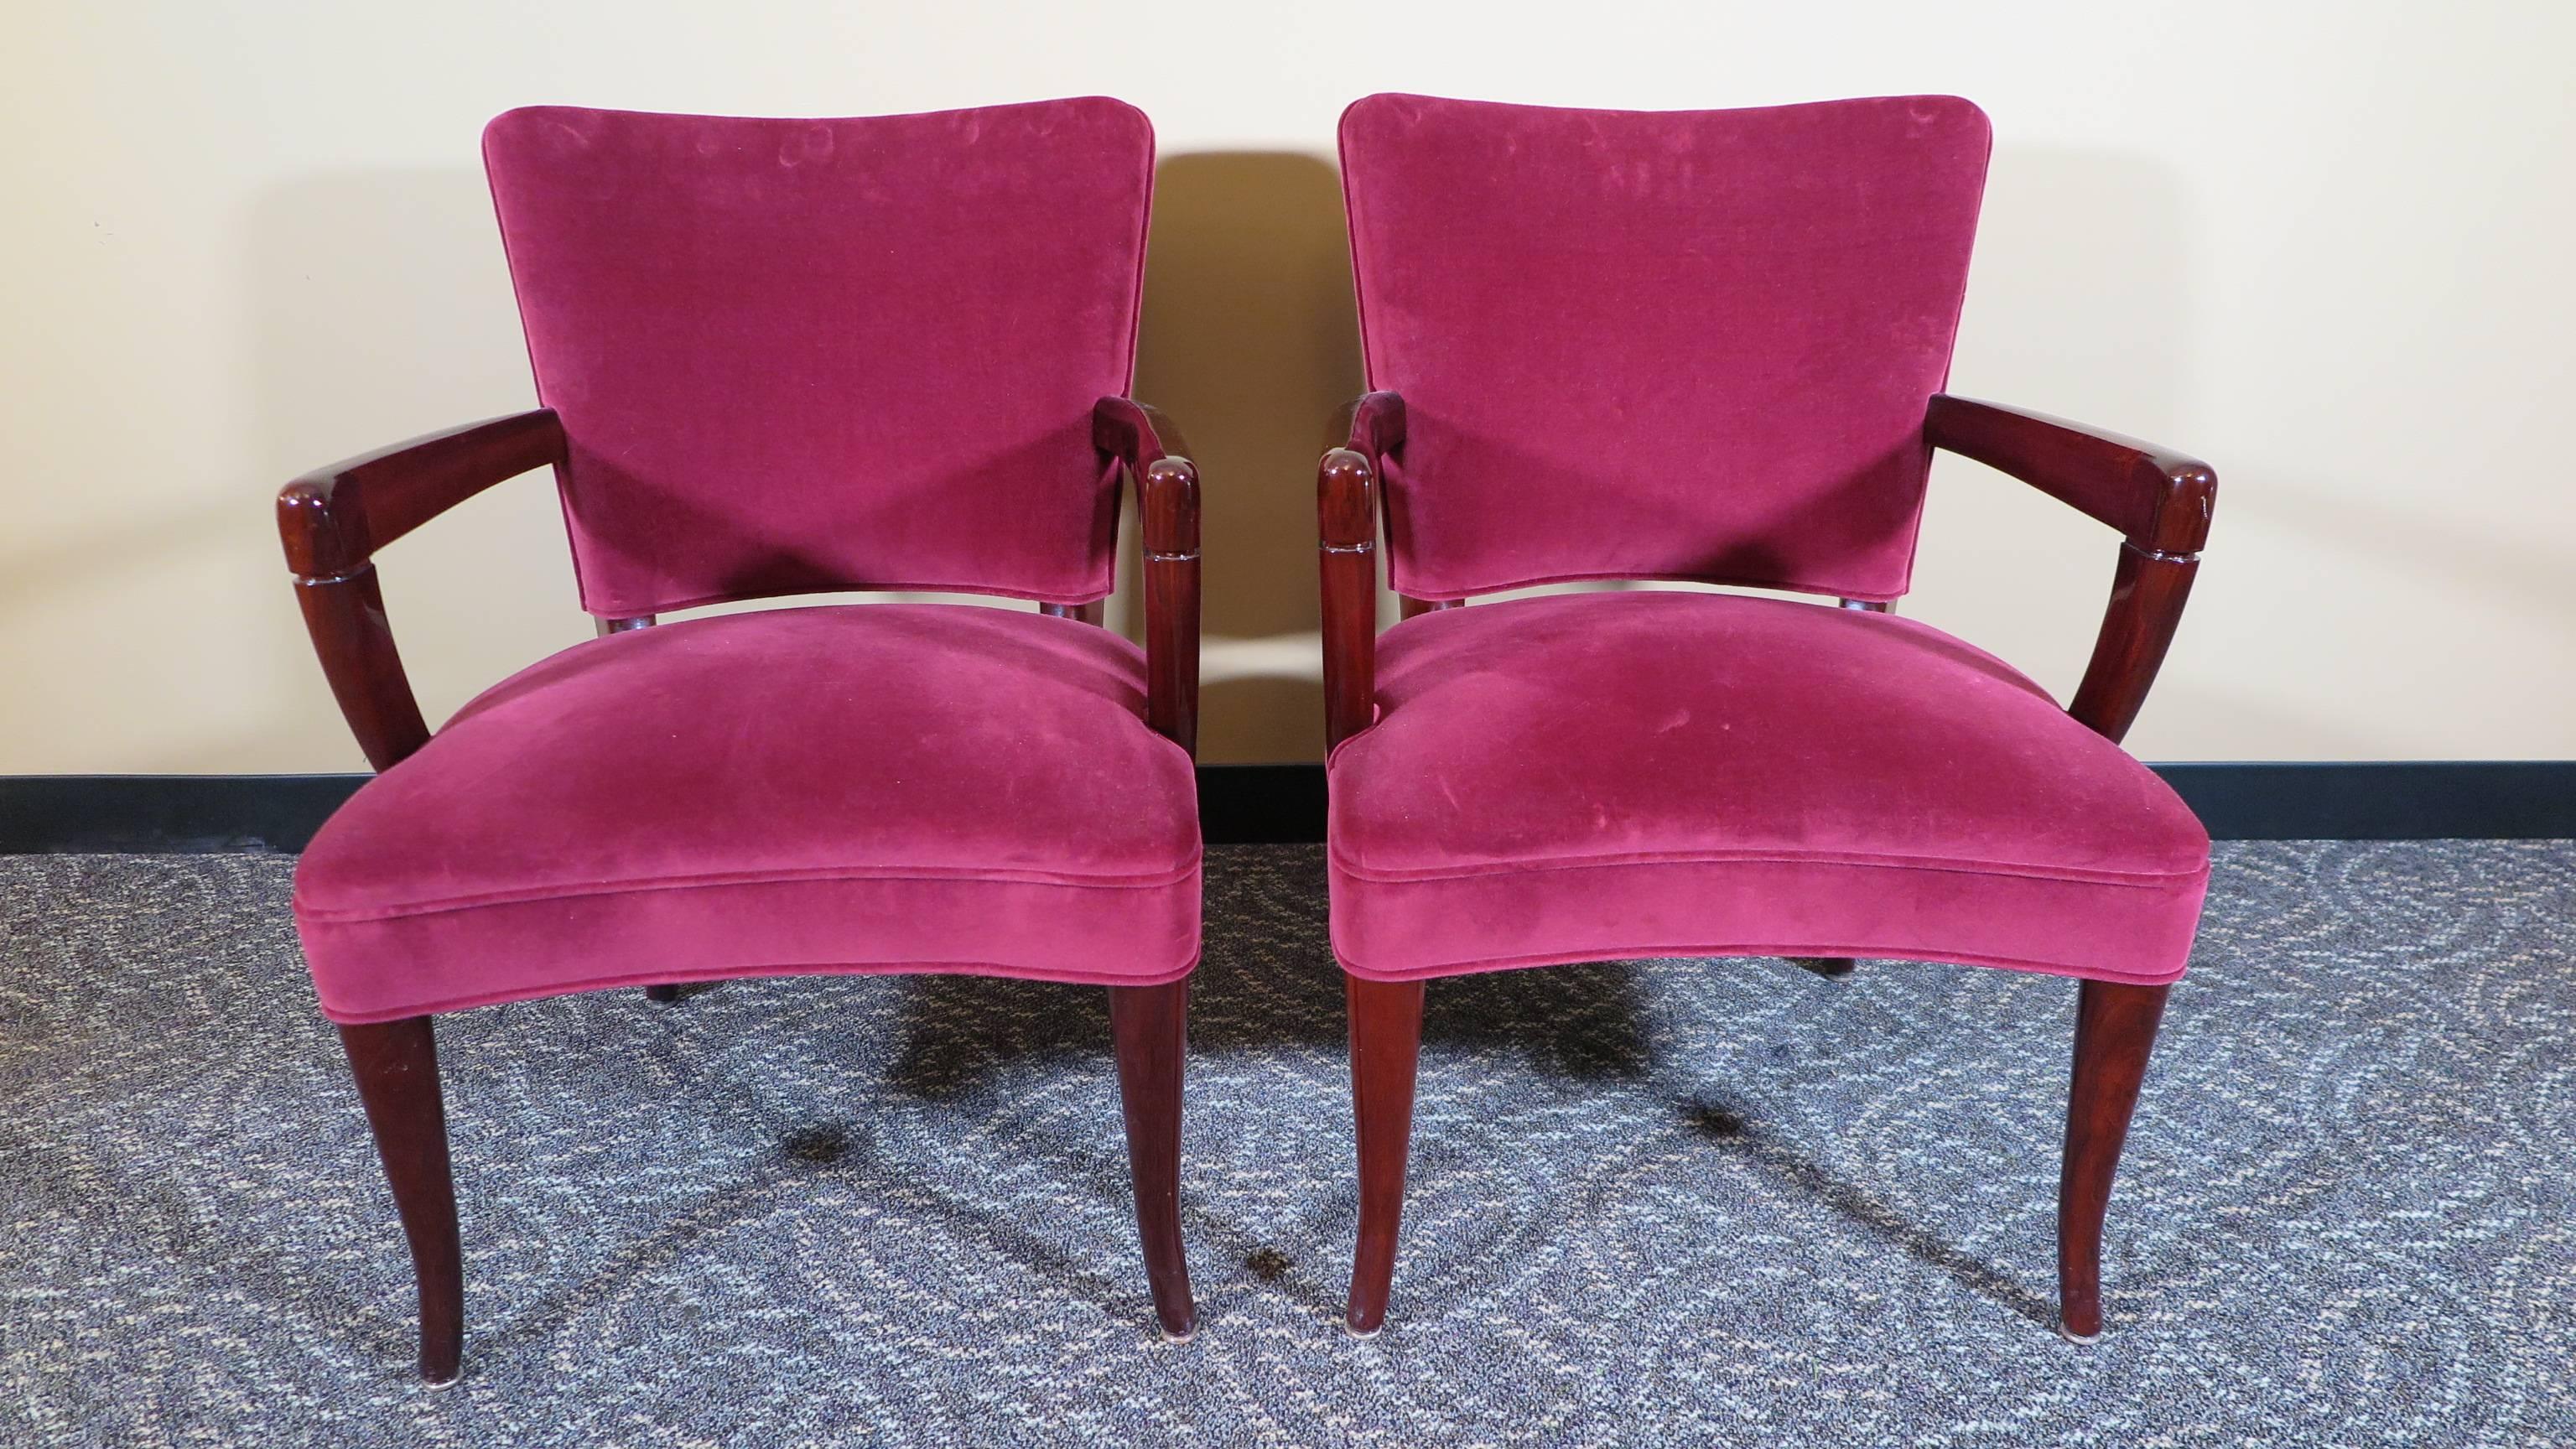 A pair of saber leg armchair by Widdicomb Furniture Company, 1940s. Widdicomb armchairs having saber legs and large out reaching arms in the style of Robsjohn-Gibbings. These chairs can be placed as they are, velvet fabric is in very good condition